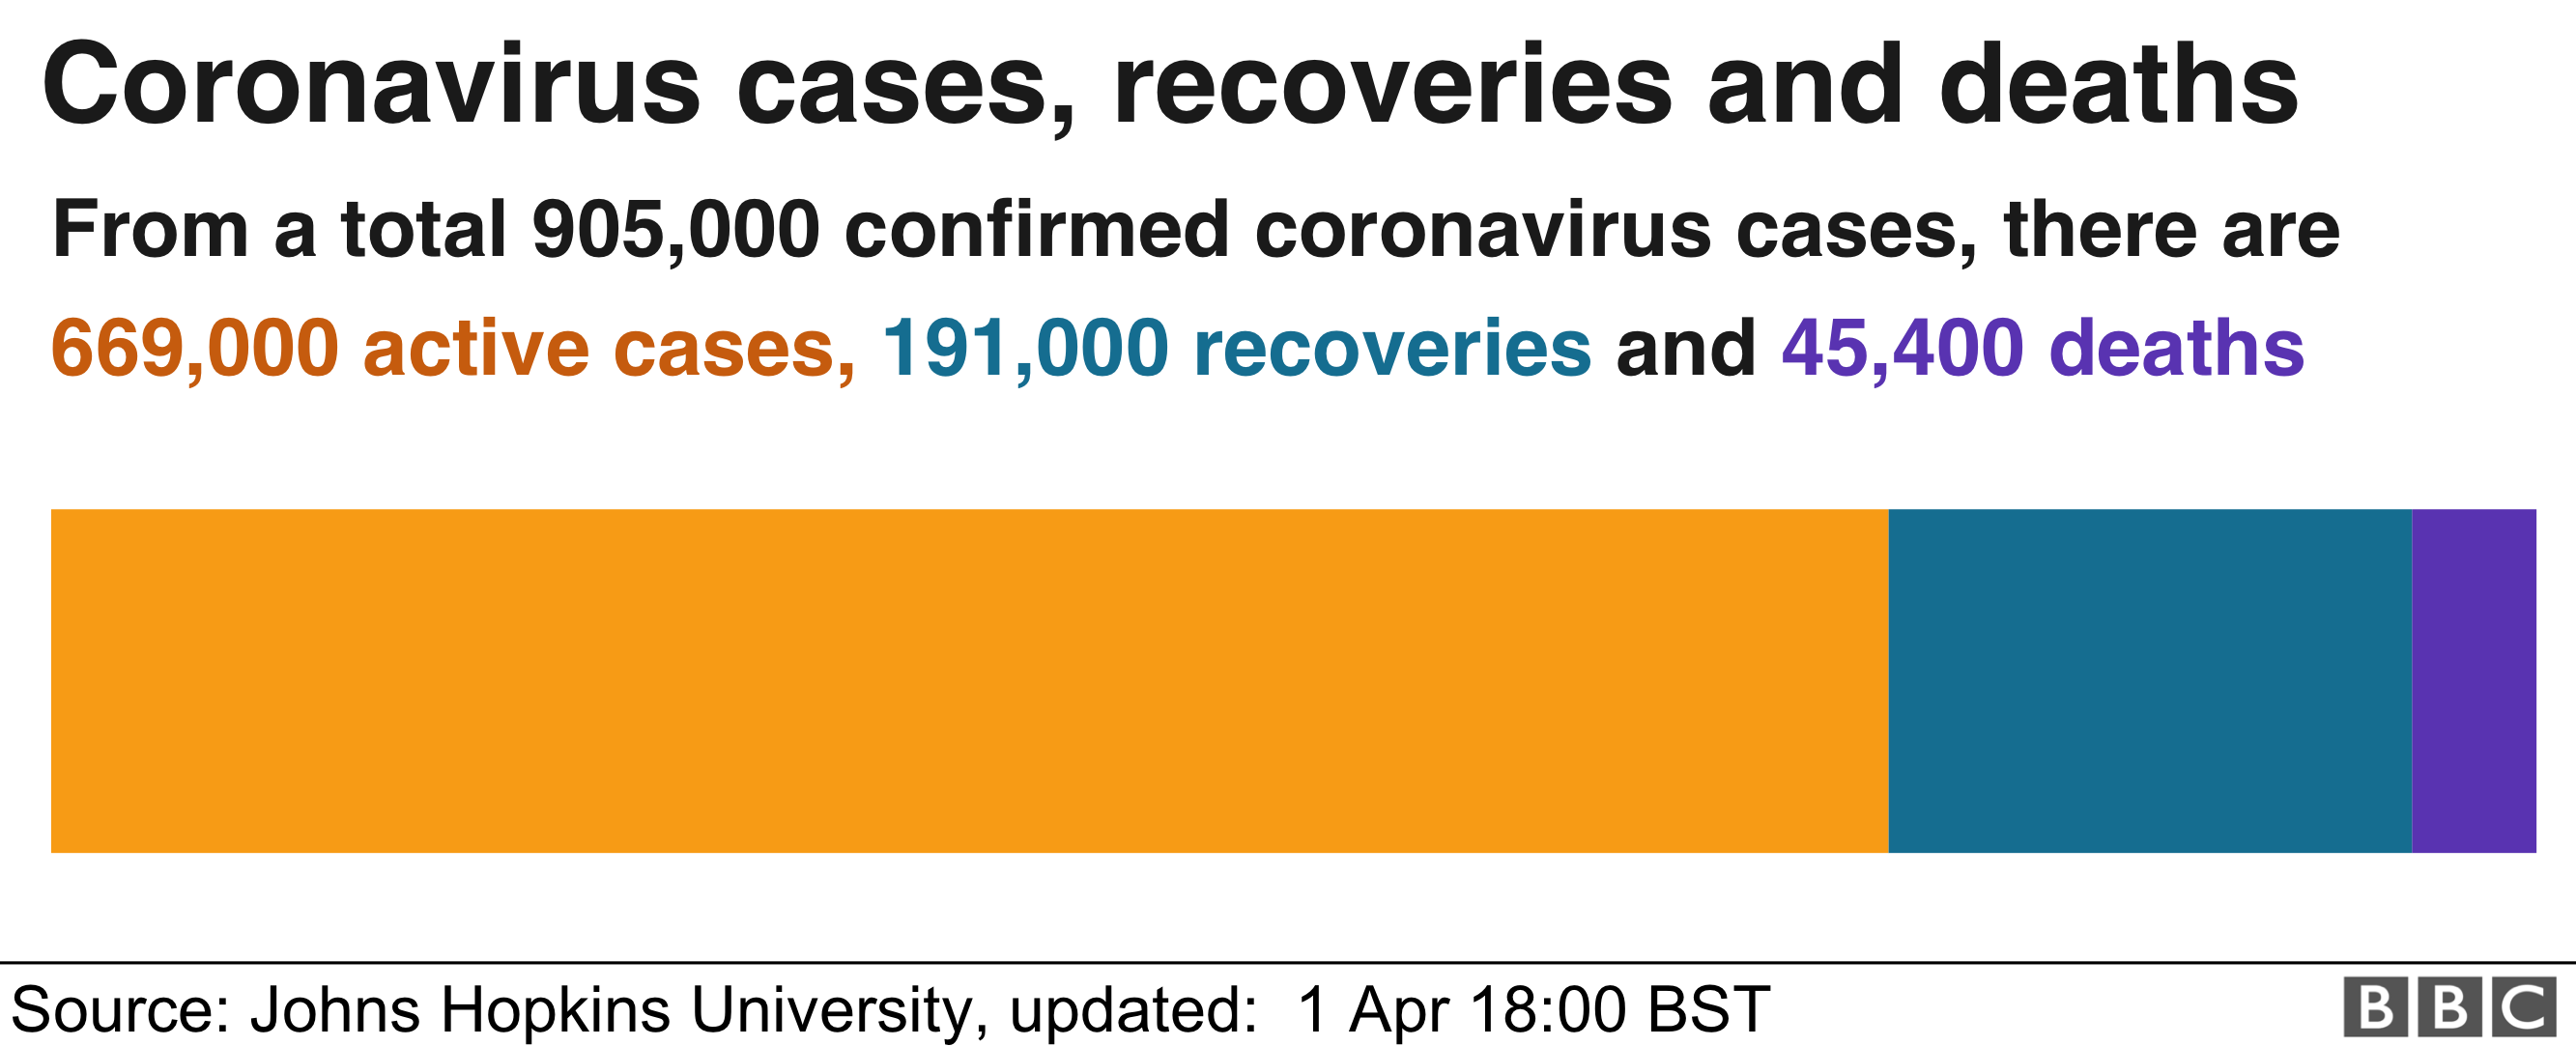 Chart shows number of active cases is nearly 700,000, 191,000 recoveries and 45,000 deaths